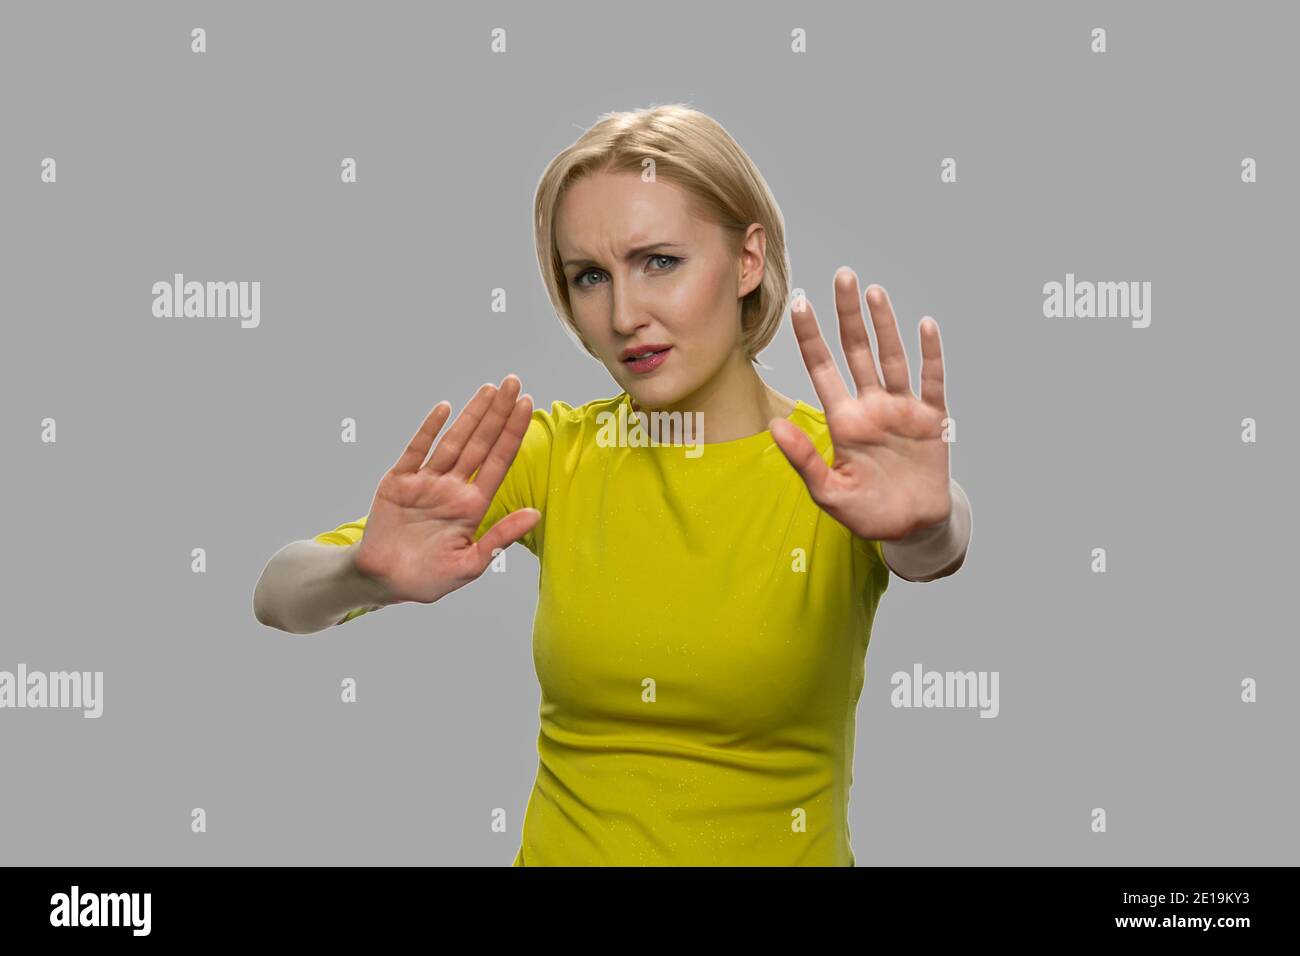 Young caucasian woman showing rejection sign. Stock Photo